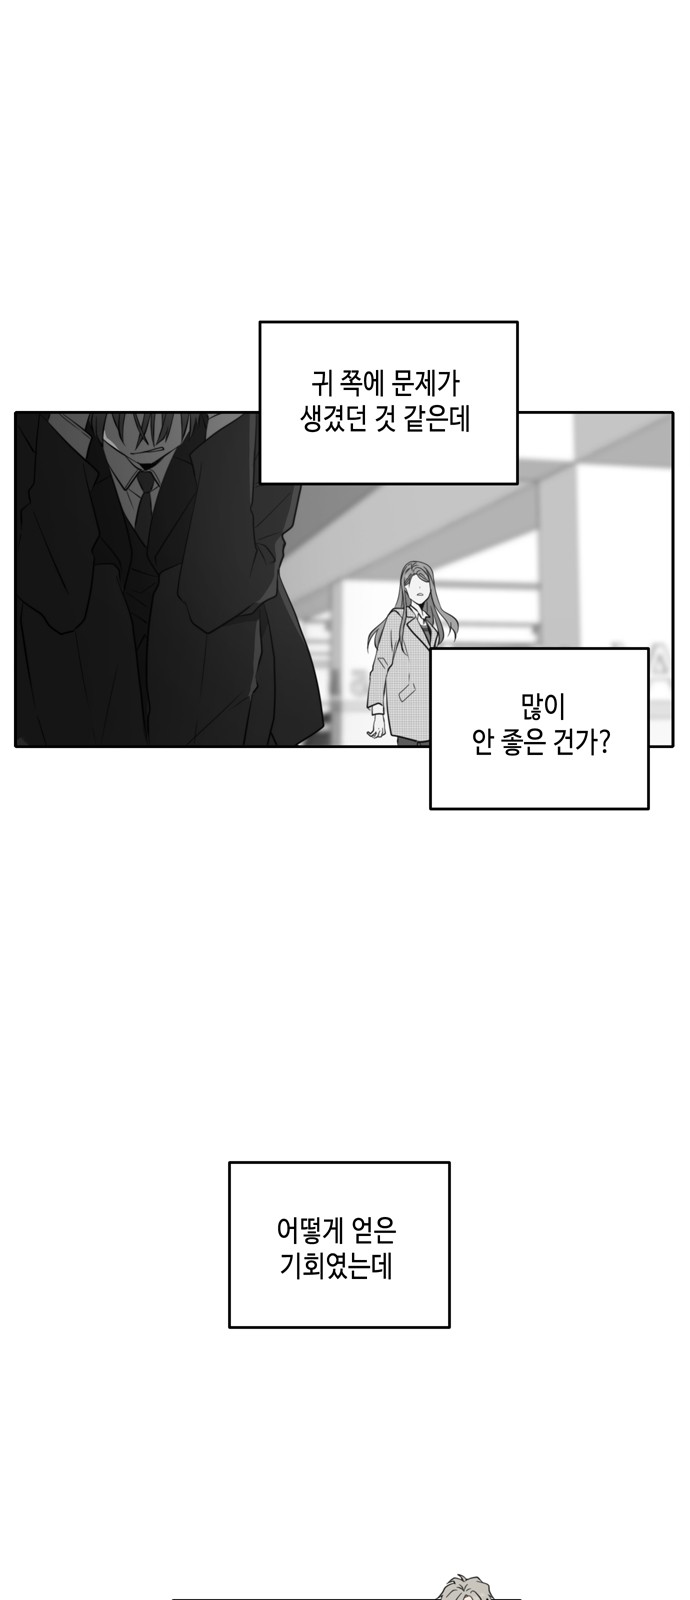 See You in My 19th Life - Chapter 8 - Page 2